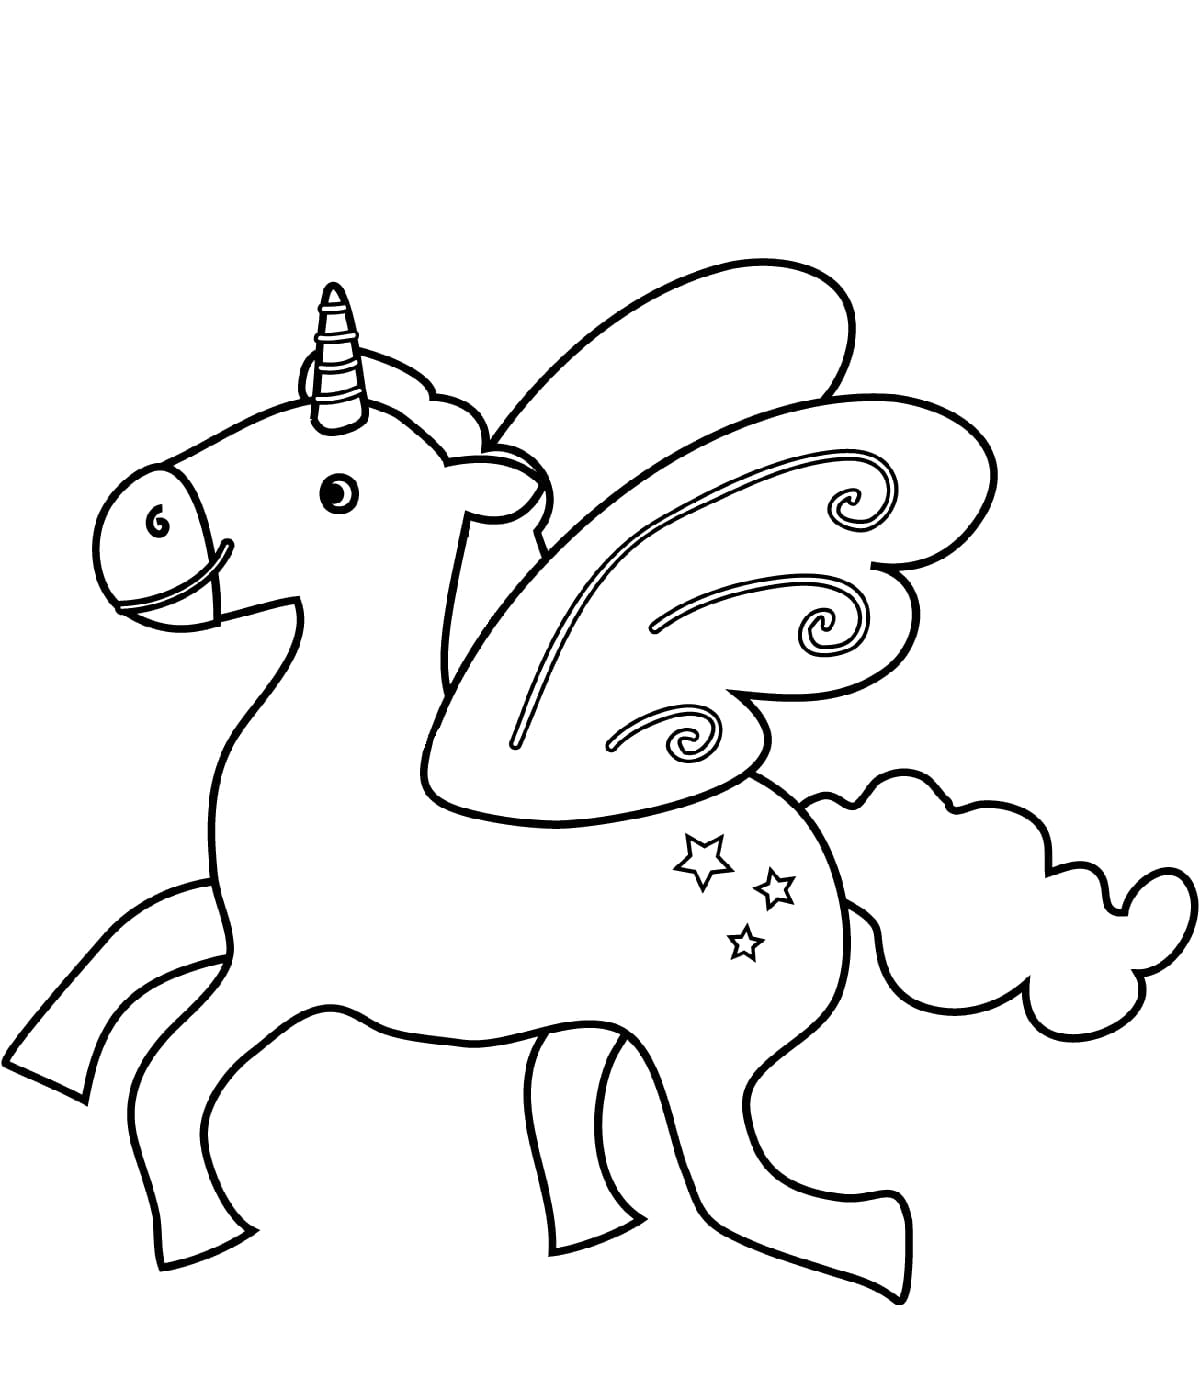 butterfly-winged-unicorn-coloring-page-free-printable-coloring-pages